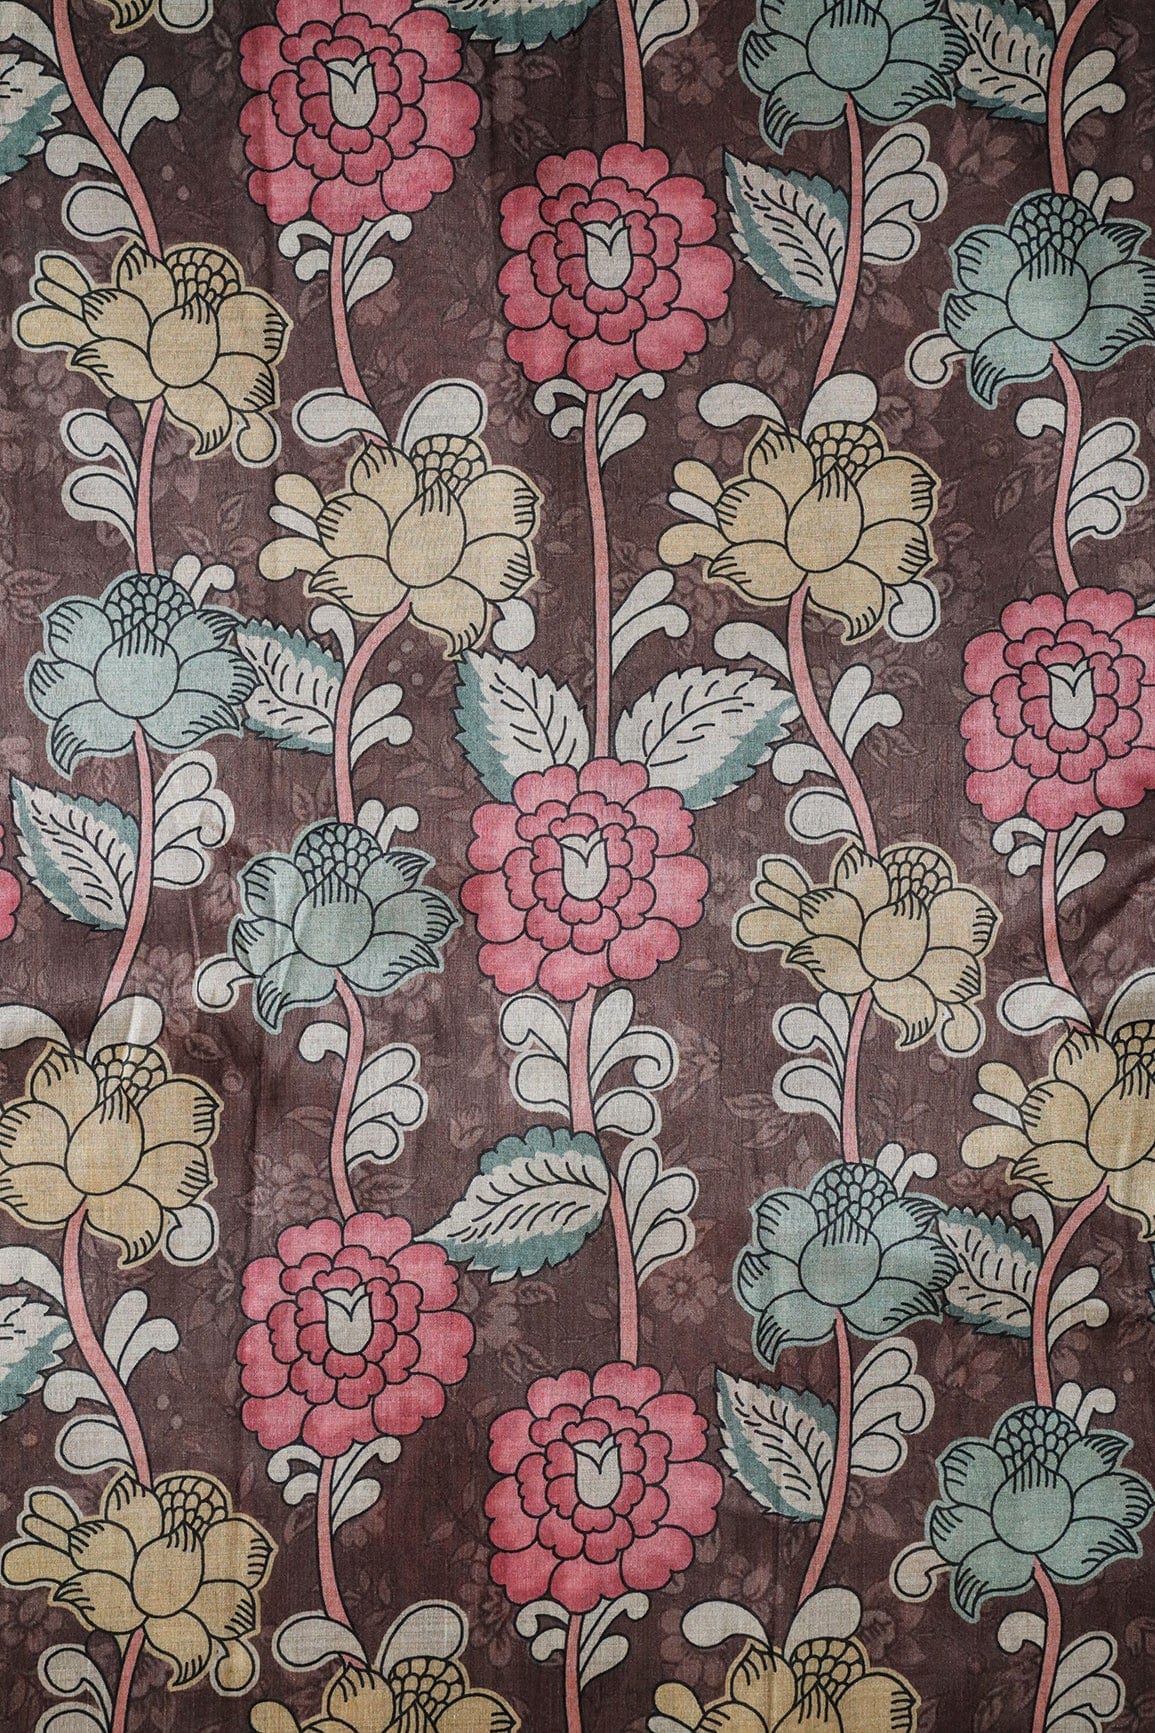 doeraa Prints Brown And Pink Floral Pattern Digital Print On Mulberry Silk Fabric